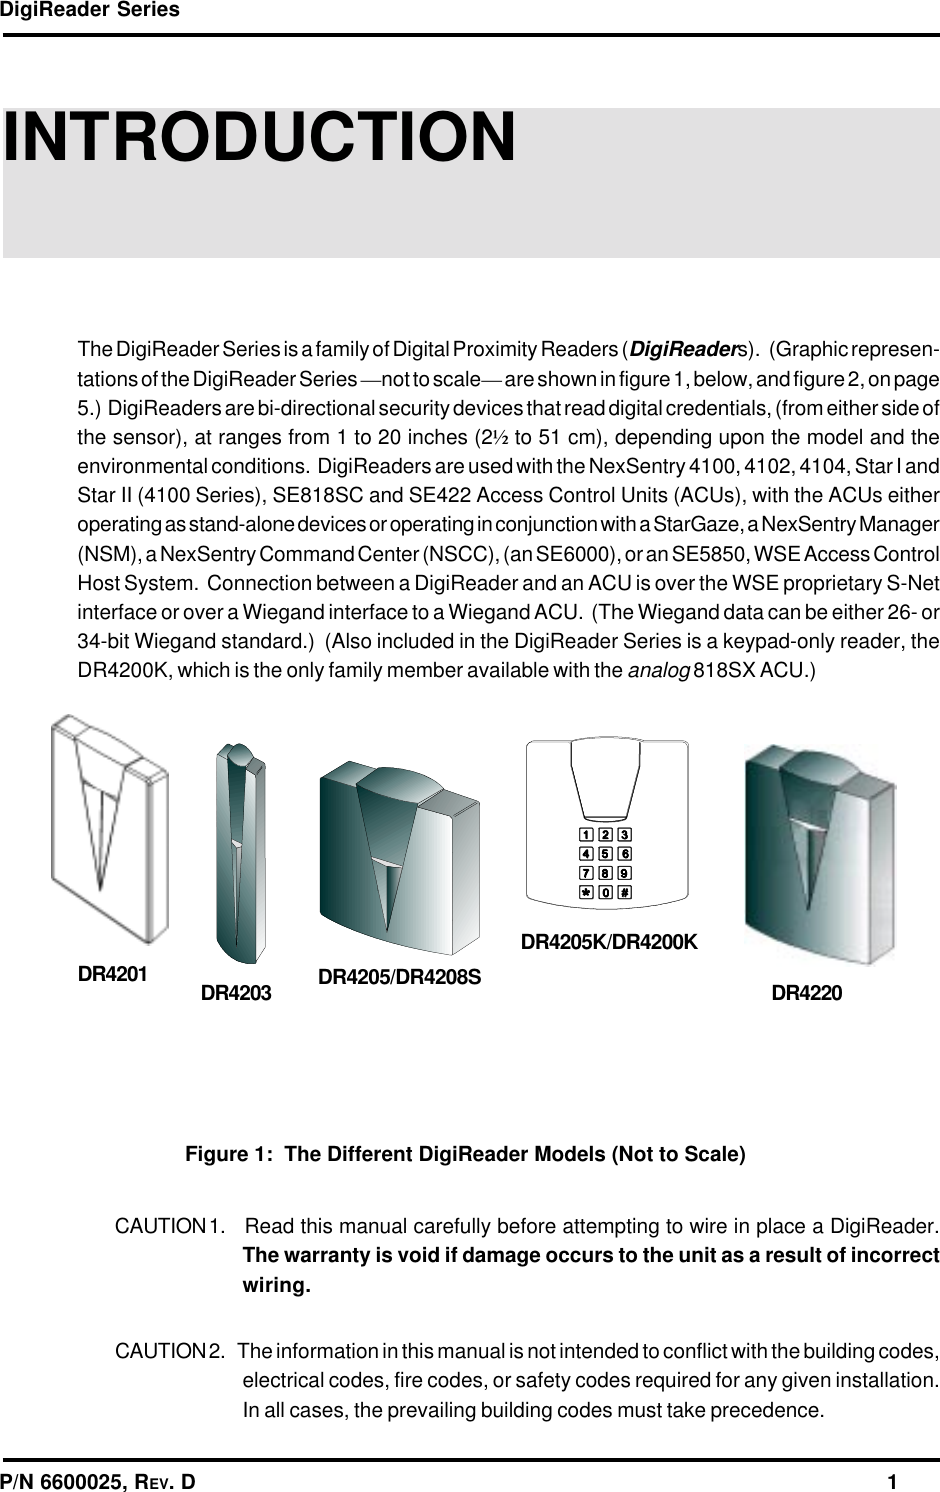 DigiReader SeriesP/N 6600025, REV. D                                                                                                              1INTRODUCTIONThe DigiReader Series is a family of Digital Proximity Readers (DigiReaders).   (Graphic represen-tations of the DigiReader Series —not to scale— are shown in figure 1, below, and figure 2, on page5.)  DigiReaders are bi-directional security devices that read digital credentials, (from either side ofthe sensor), at ranges from 1 to 20 inches (2½ to 51 cm), depending upon the model and theenvironmental conditions.  DigiReaders are used with the NexSentry 4100, 4102, 4104, Star I andStar II (4100 Series), SE818SC and SE422 Access Control Units (ACUs), with the ACUs eitheroperating as stand-alone devices or operating in conjunction with a StarGaze, a NexSentry Manager(NSM), a NexSentry Command Center (NSCC), (an SE6000), or an SE5850, WSE Access ControlHost System.  Connection between a DigiReader and an ACU is over the WSE proprietary S-Netinterface or over a Wiegand interface to a Wiegand ACU.  (The Wiegand data can be either 26- or34-bit Wiegand standard.)  (Also included in the DigiReader Series is a keypad-only reader, theDR4200K, which is the only family member available with the analog 818SX ACU.)CAUTION 1.   Read this manual carefully before attempting to wire in place a DigiReader.The warranty is void if damage occurs to the unit as a result of incorrectwiring.CAUTION 2.   The information in this manual is not intended to conflict with the building codes,electrical codes, fire codes, or safety codes required for any given installation.In all cases, the prevailing building codes must take precedence.DR4201 DR4203 DR4205/DR4208SDR4205K/DR4200KDR4220Figure 1:  The Different DigiReader Models (Not to Scale)